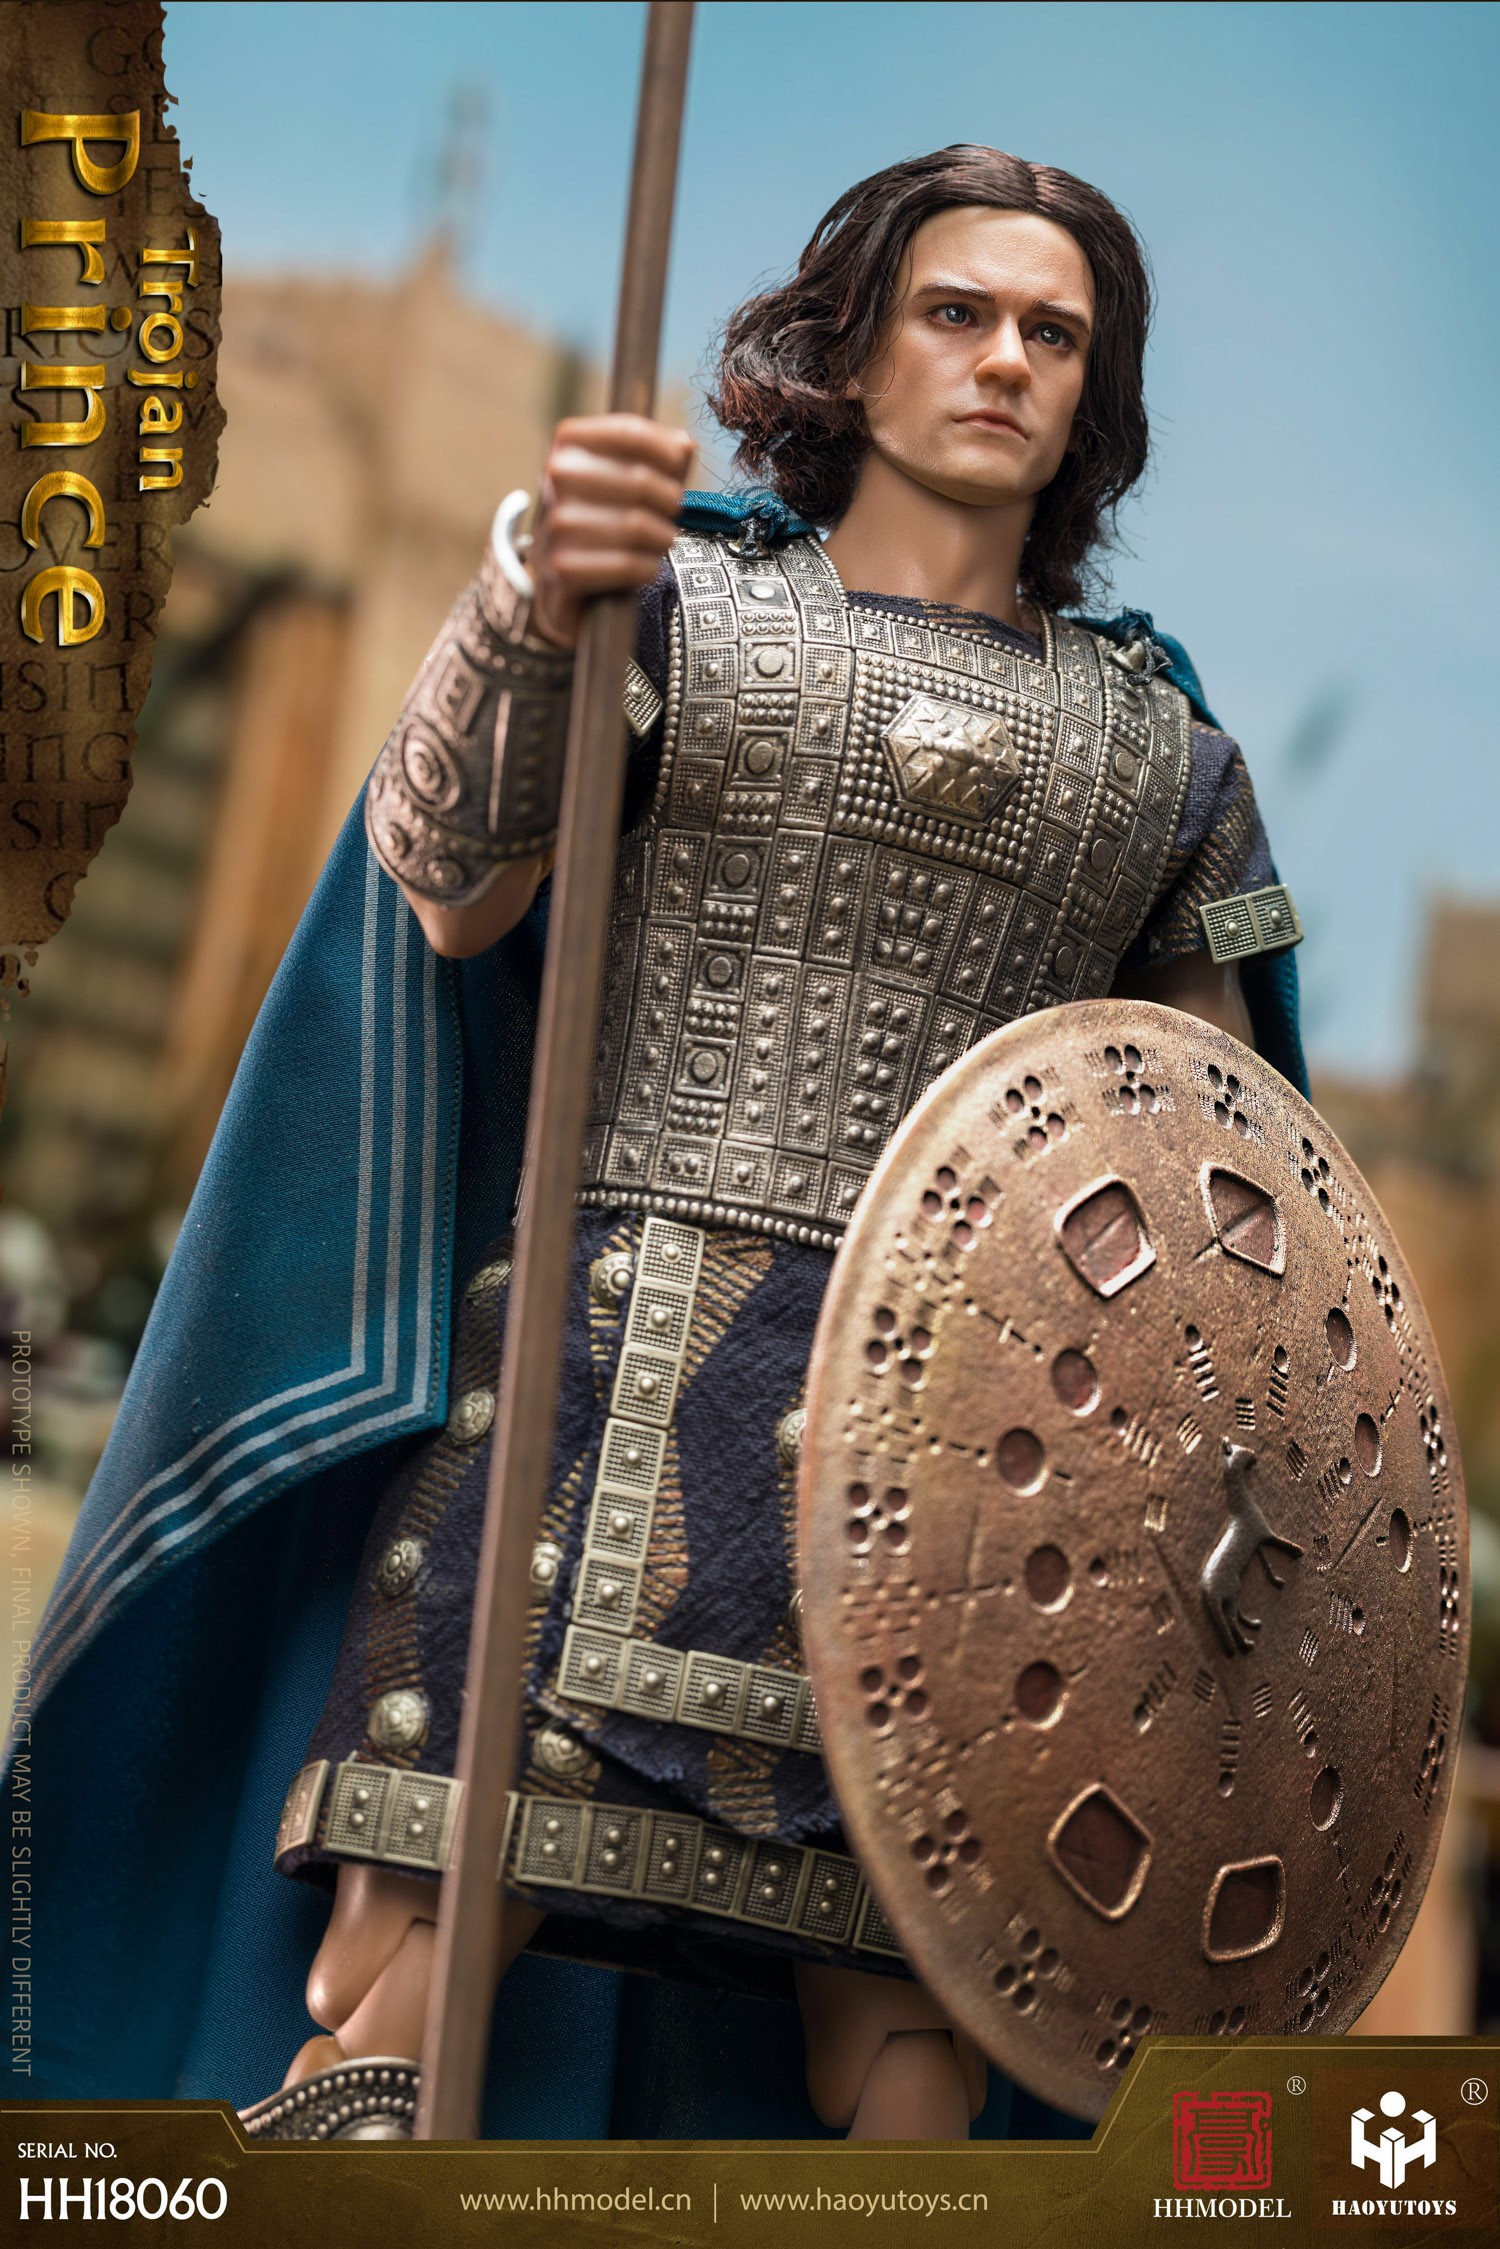 1/6 Scale HaoYuTOYS HHmodel Imperial Legion-Prince of Troy HH18060